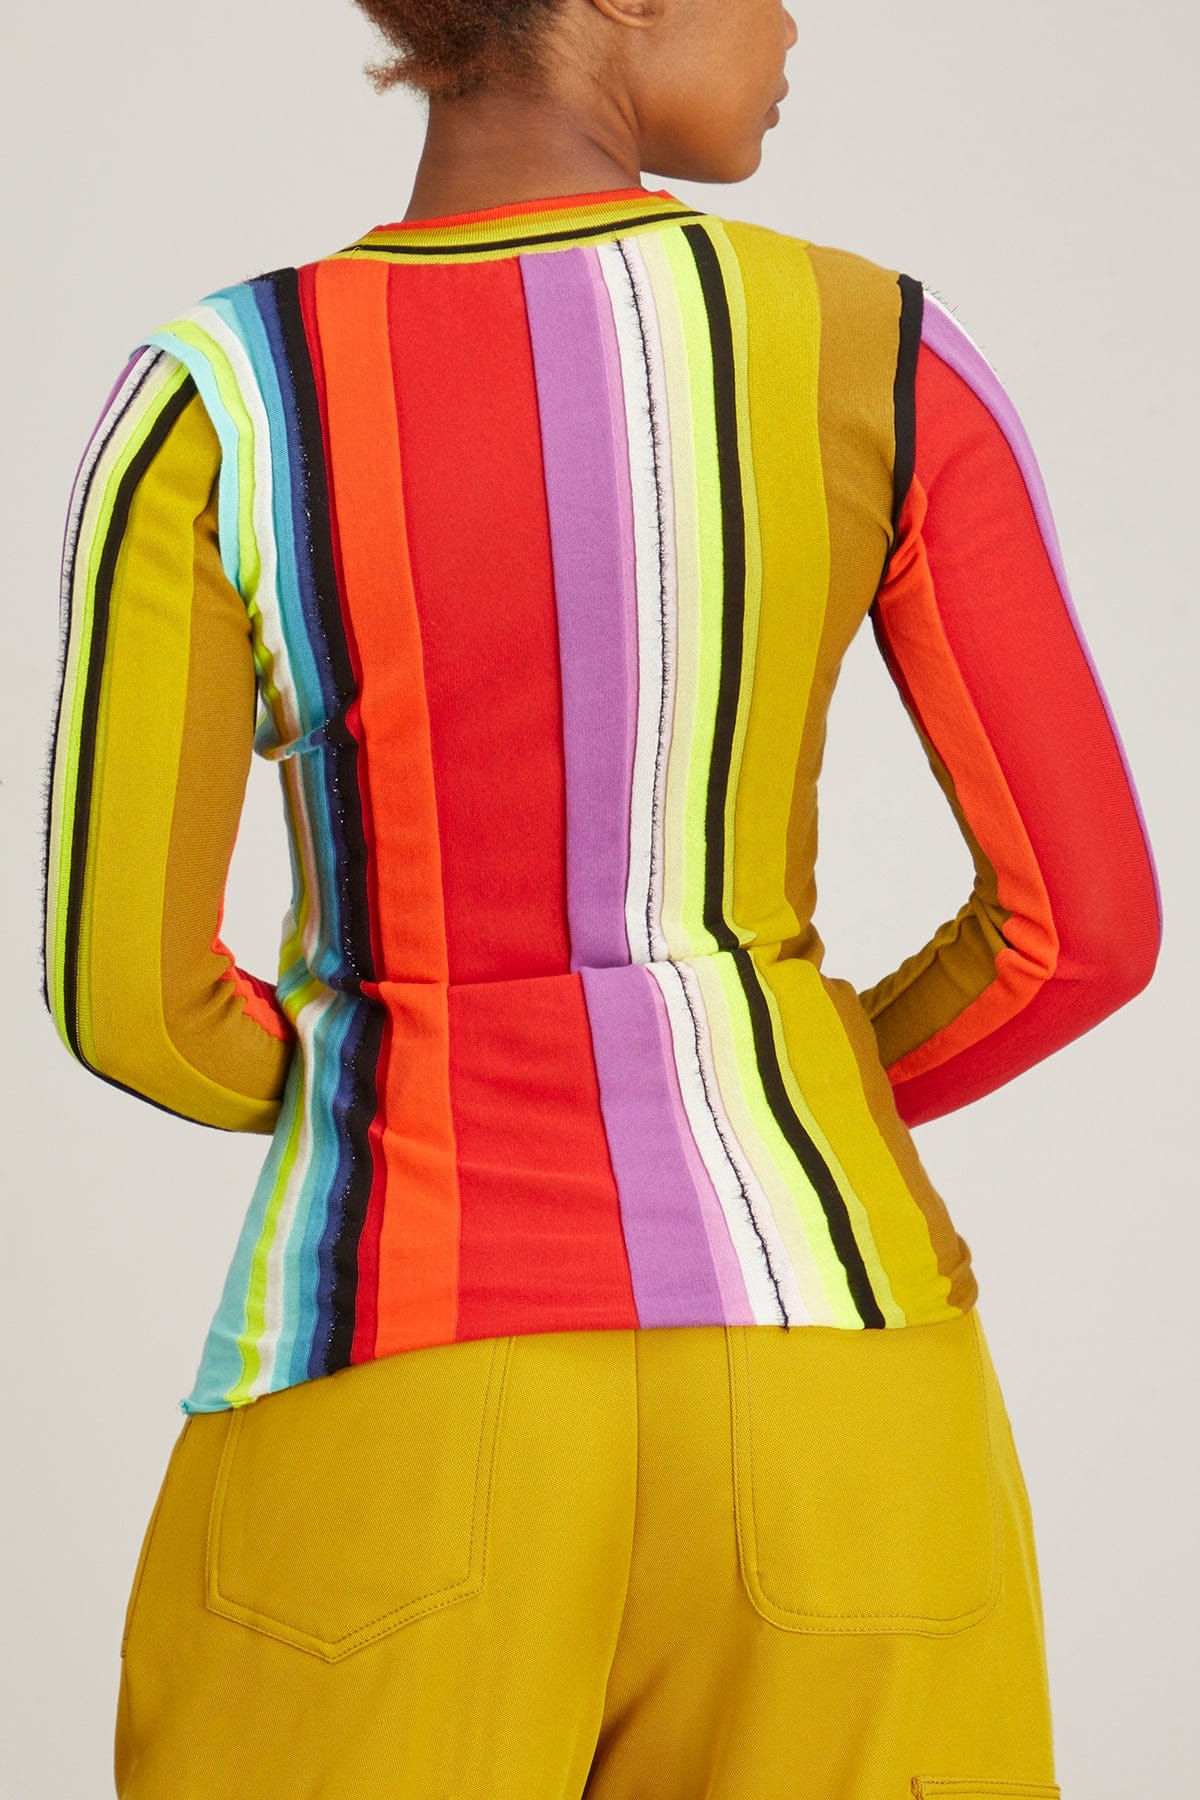 Christopher John Rogers Tops Scoop Neck Striped Knit Top in Rainbow Multi